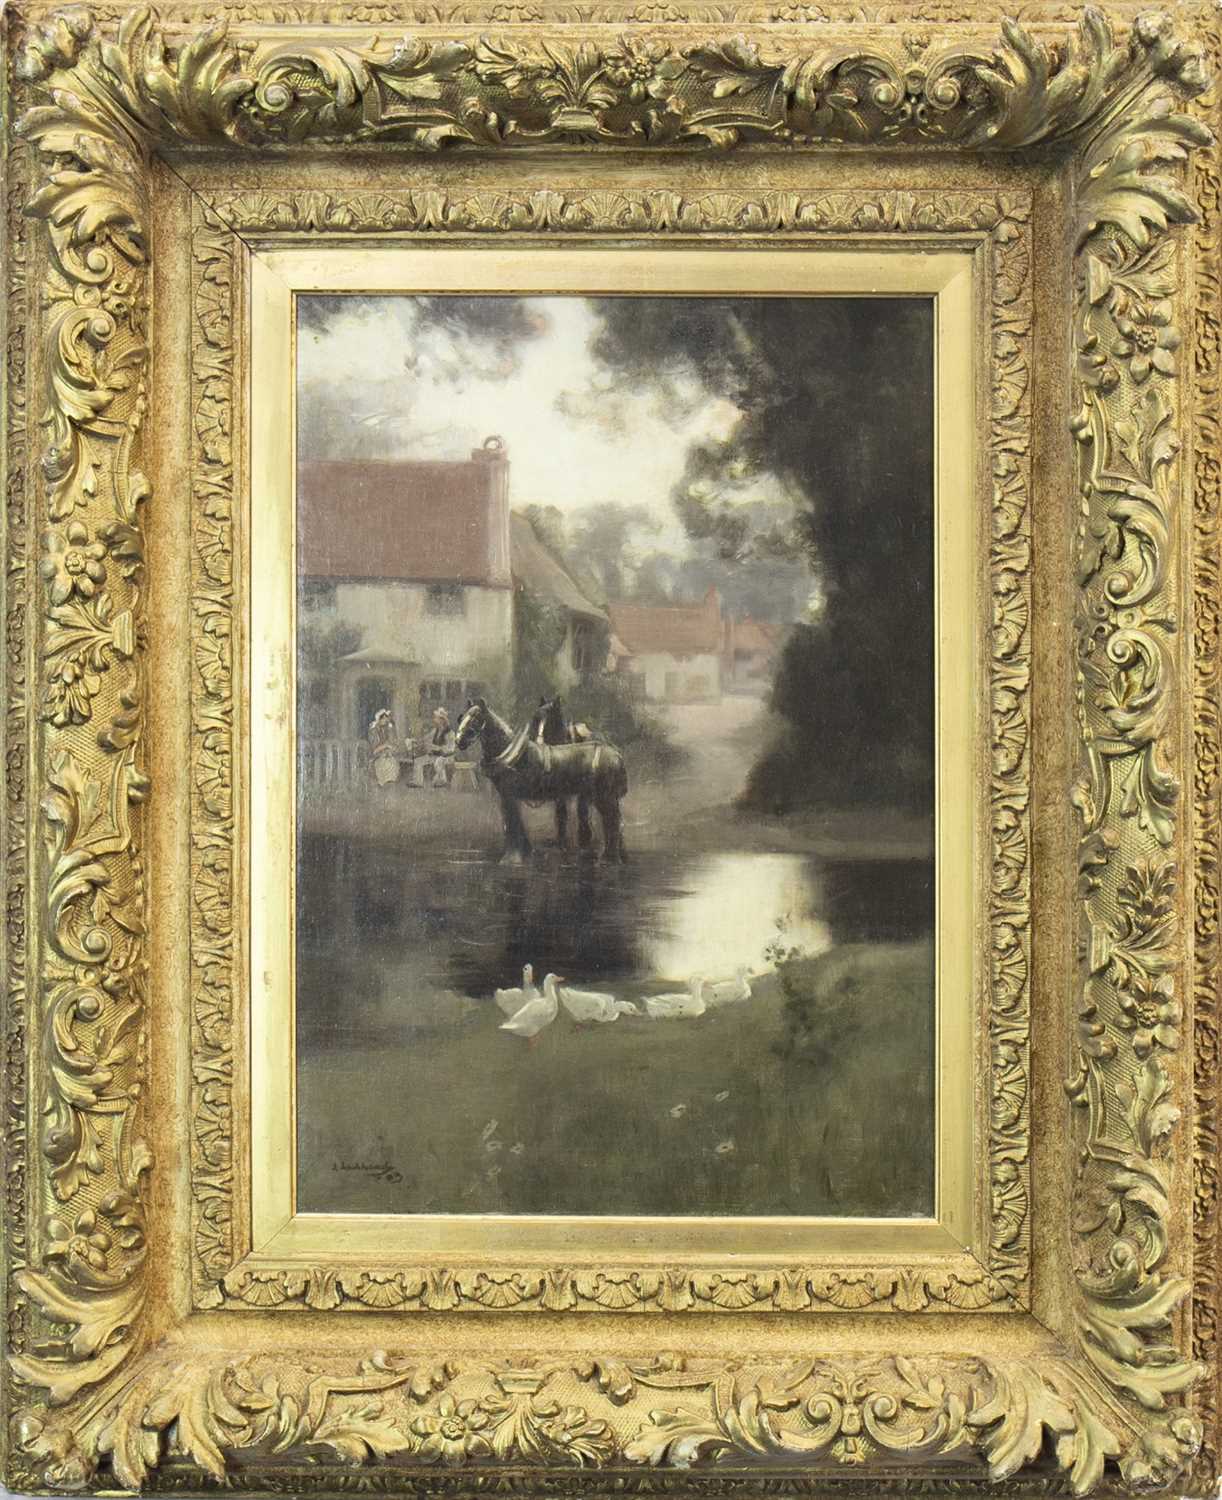 Lot 425 - RURAL SCENE WITH HORSE AND DUCKS, AN OIL BY JOHN LOCHHEAD